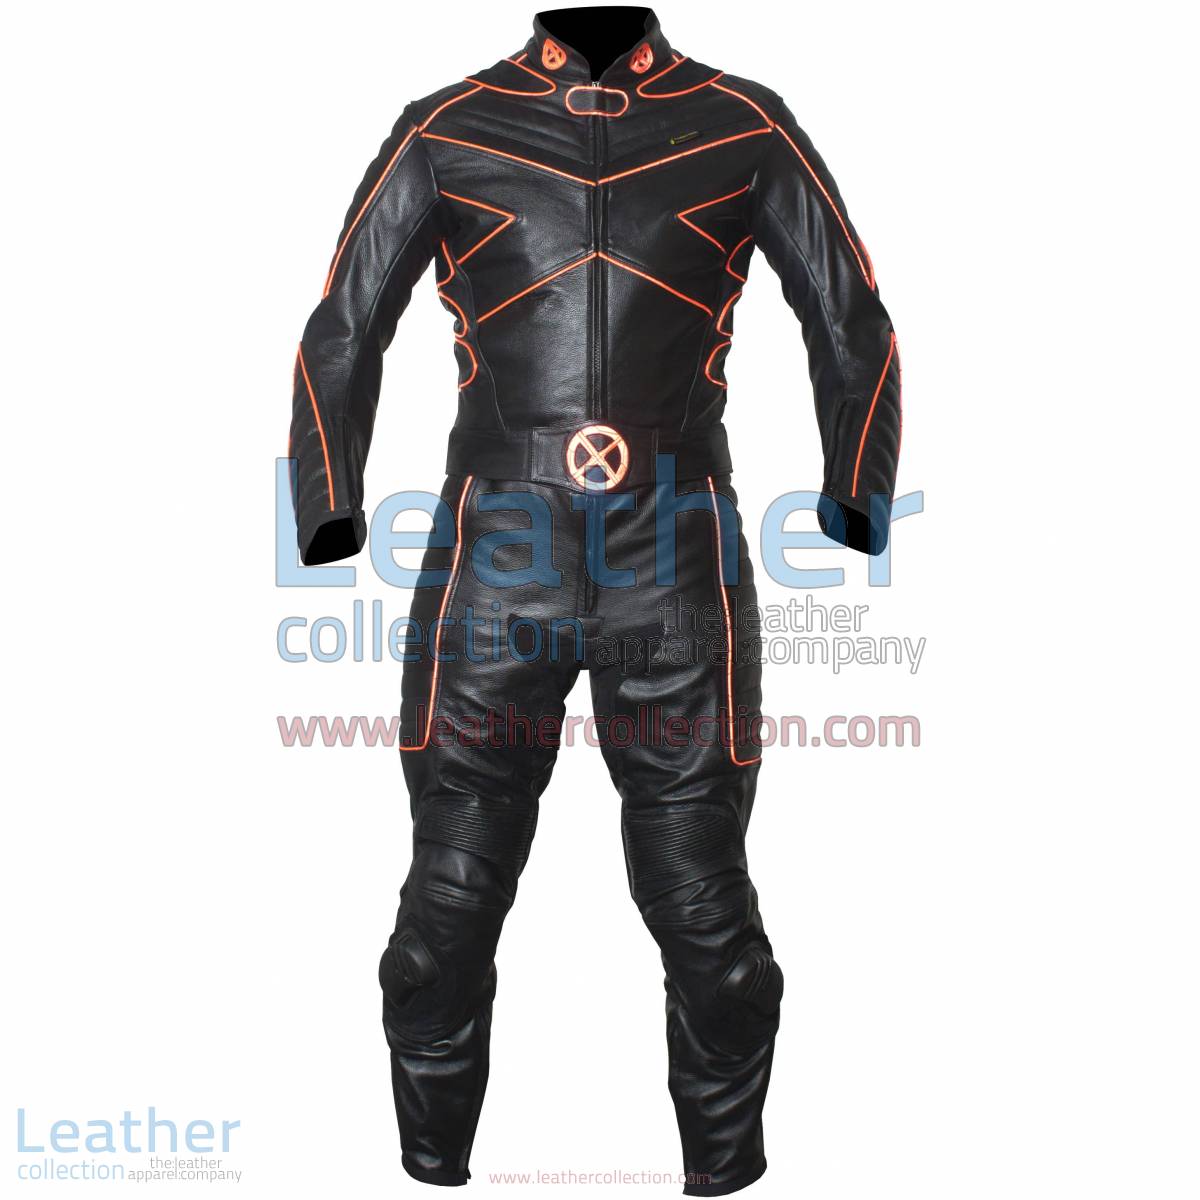 X-MEN Motorcycle Racing Leather Suit with Orange Piping